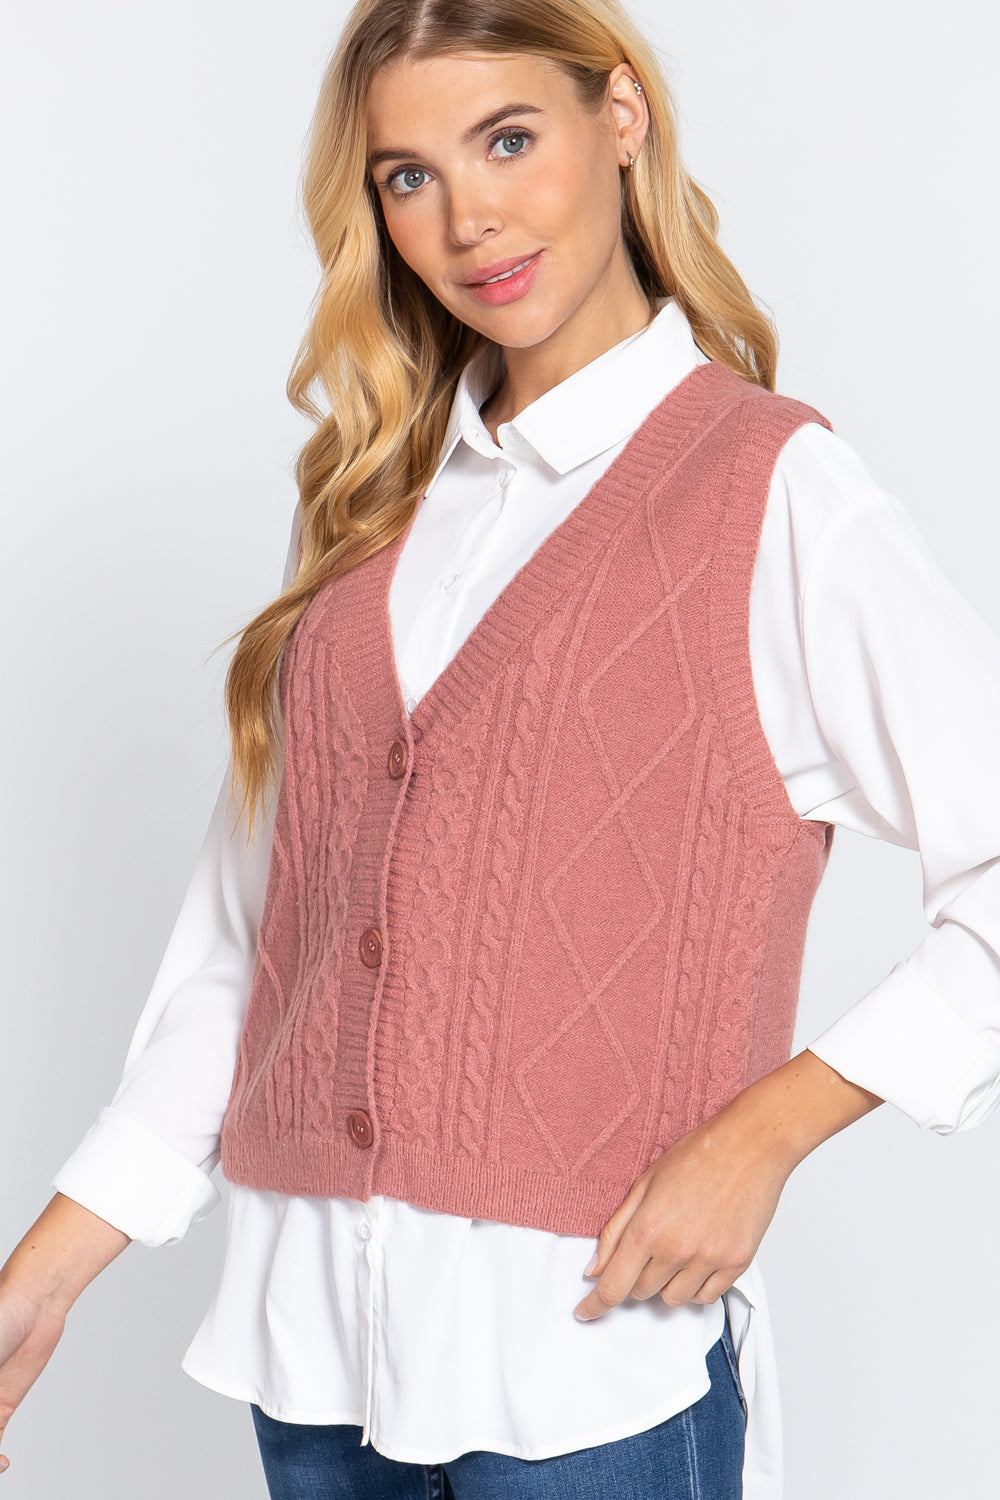 Women's V-neck Cable Sweater Vest Cardigan